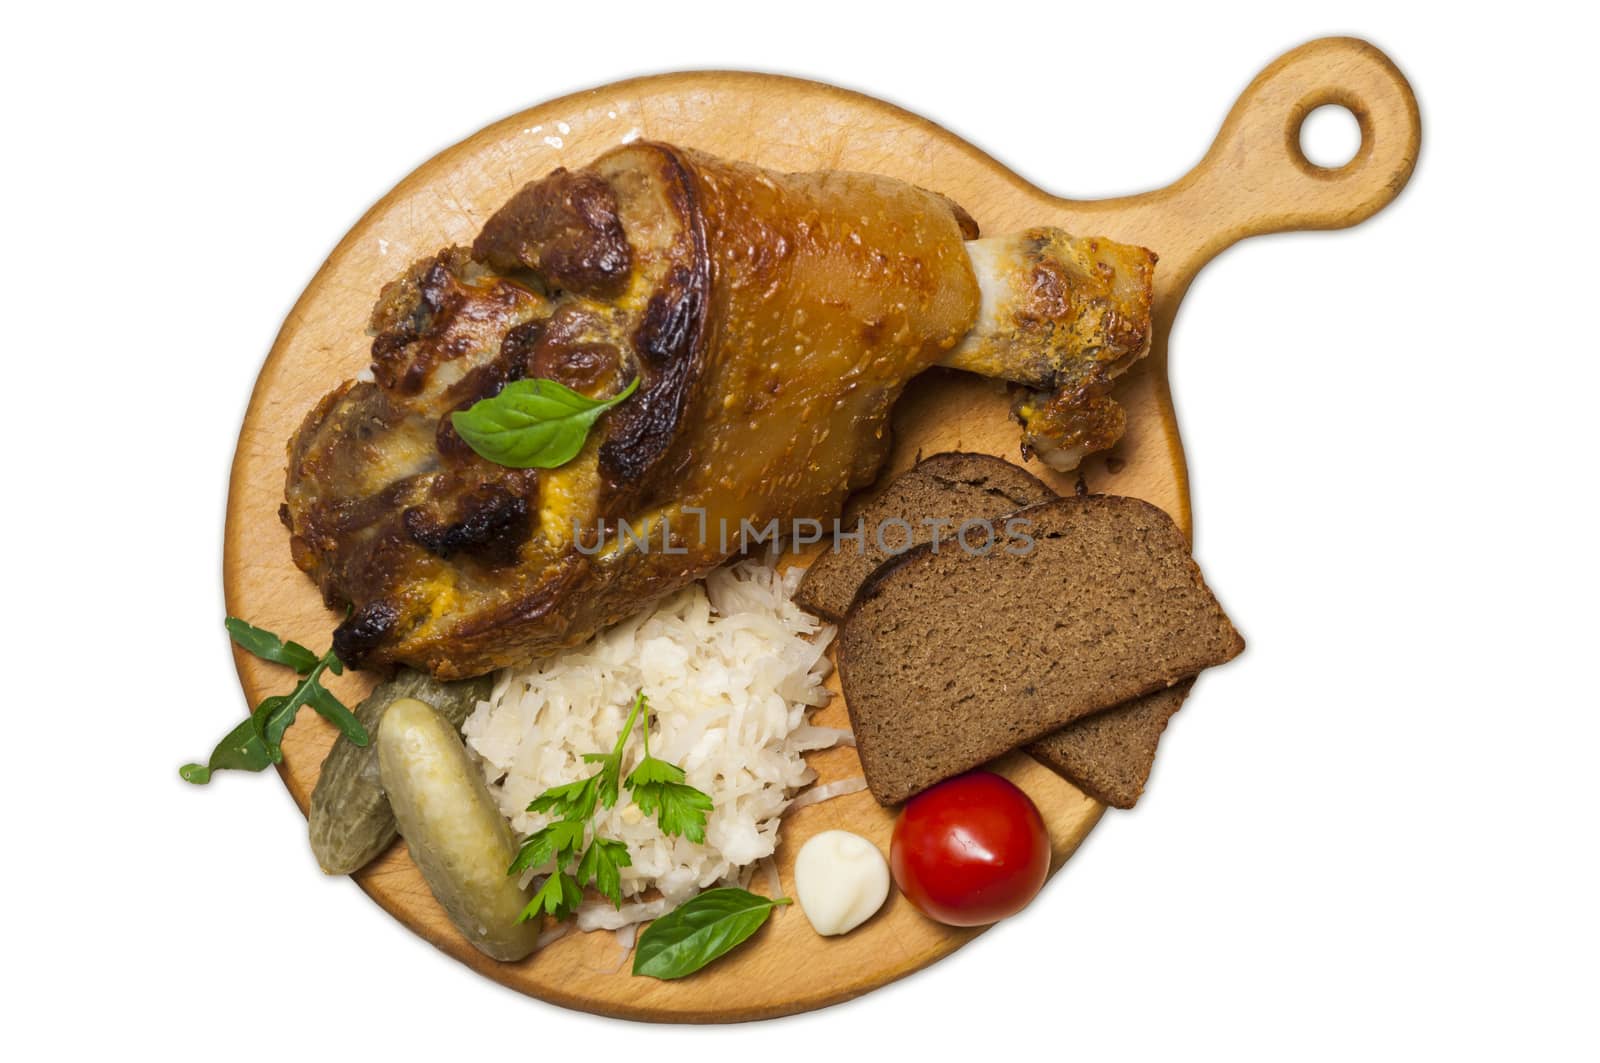 Roasted pork leg (rulka) served with sauerkraut, view from above, isolated on white